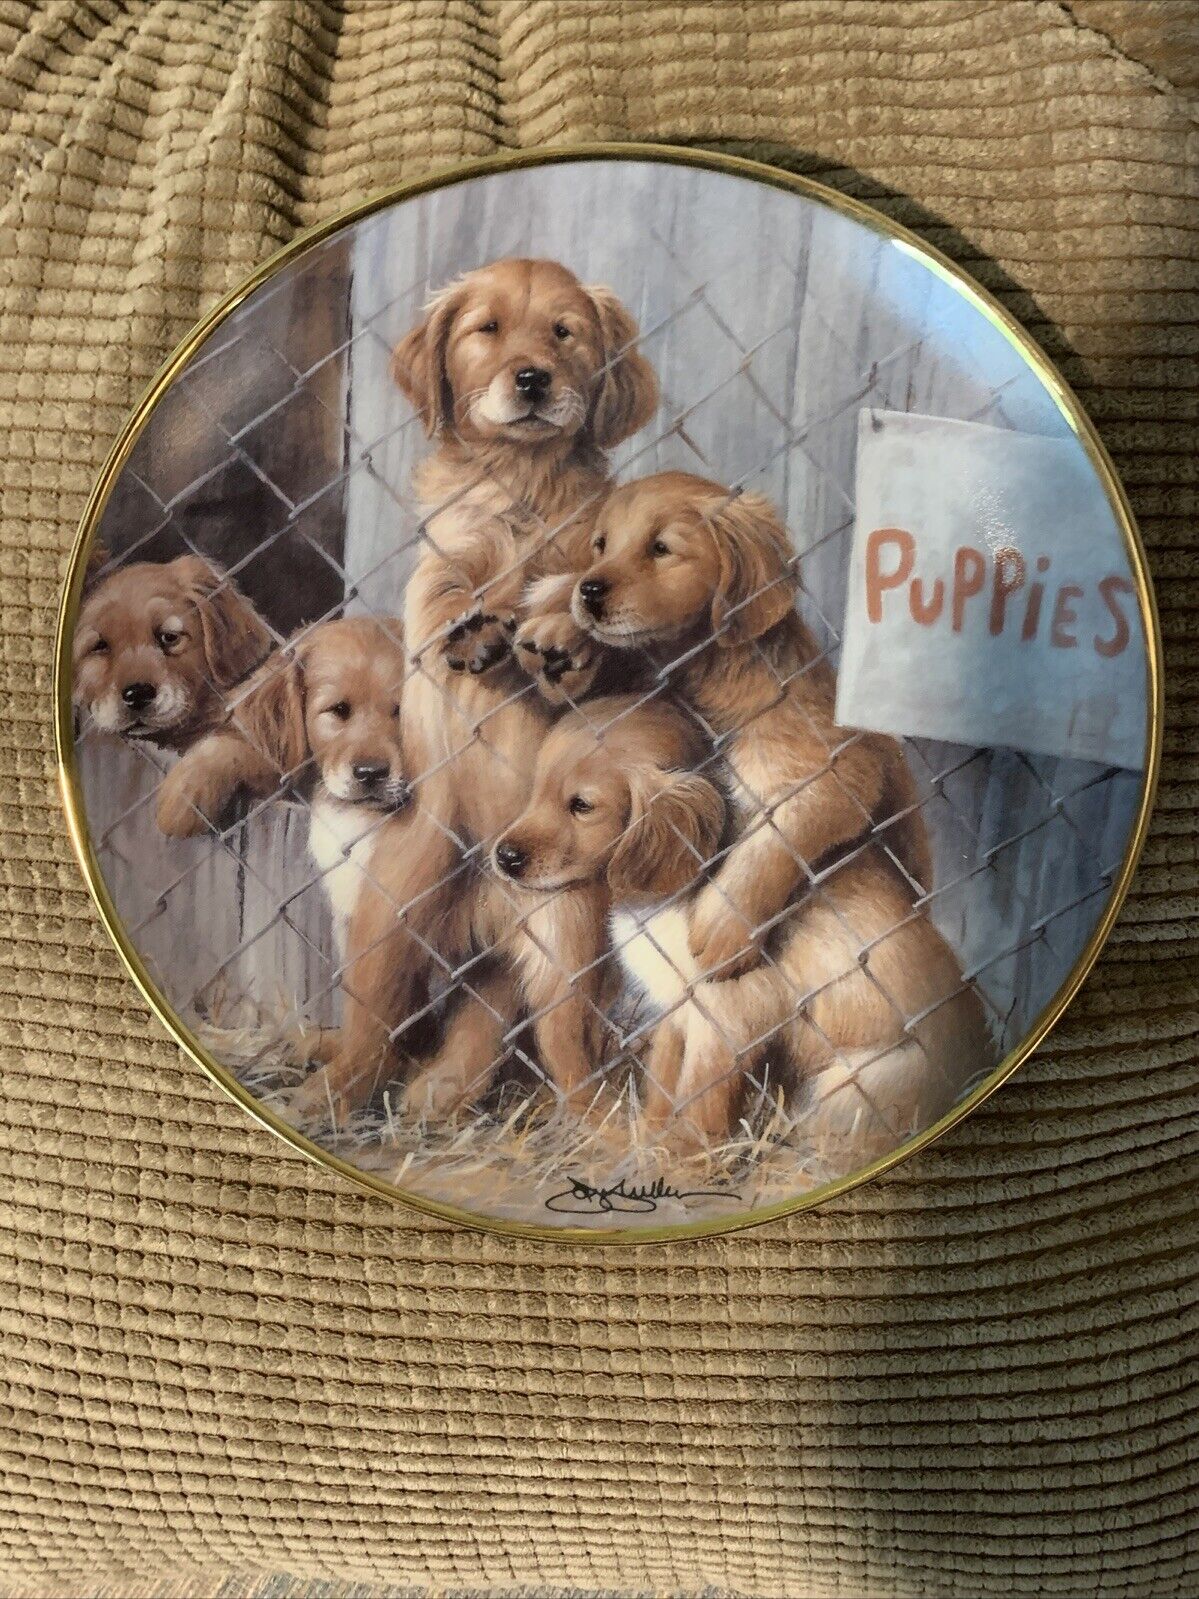 Franklin Mint Limited Edition 24k Gold Bordered Porcelain Plate - Adopt A Puppy